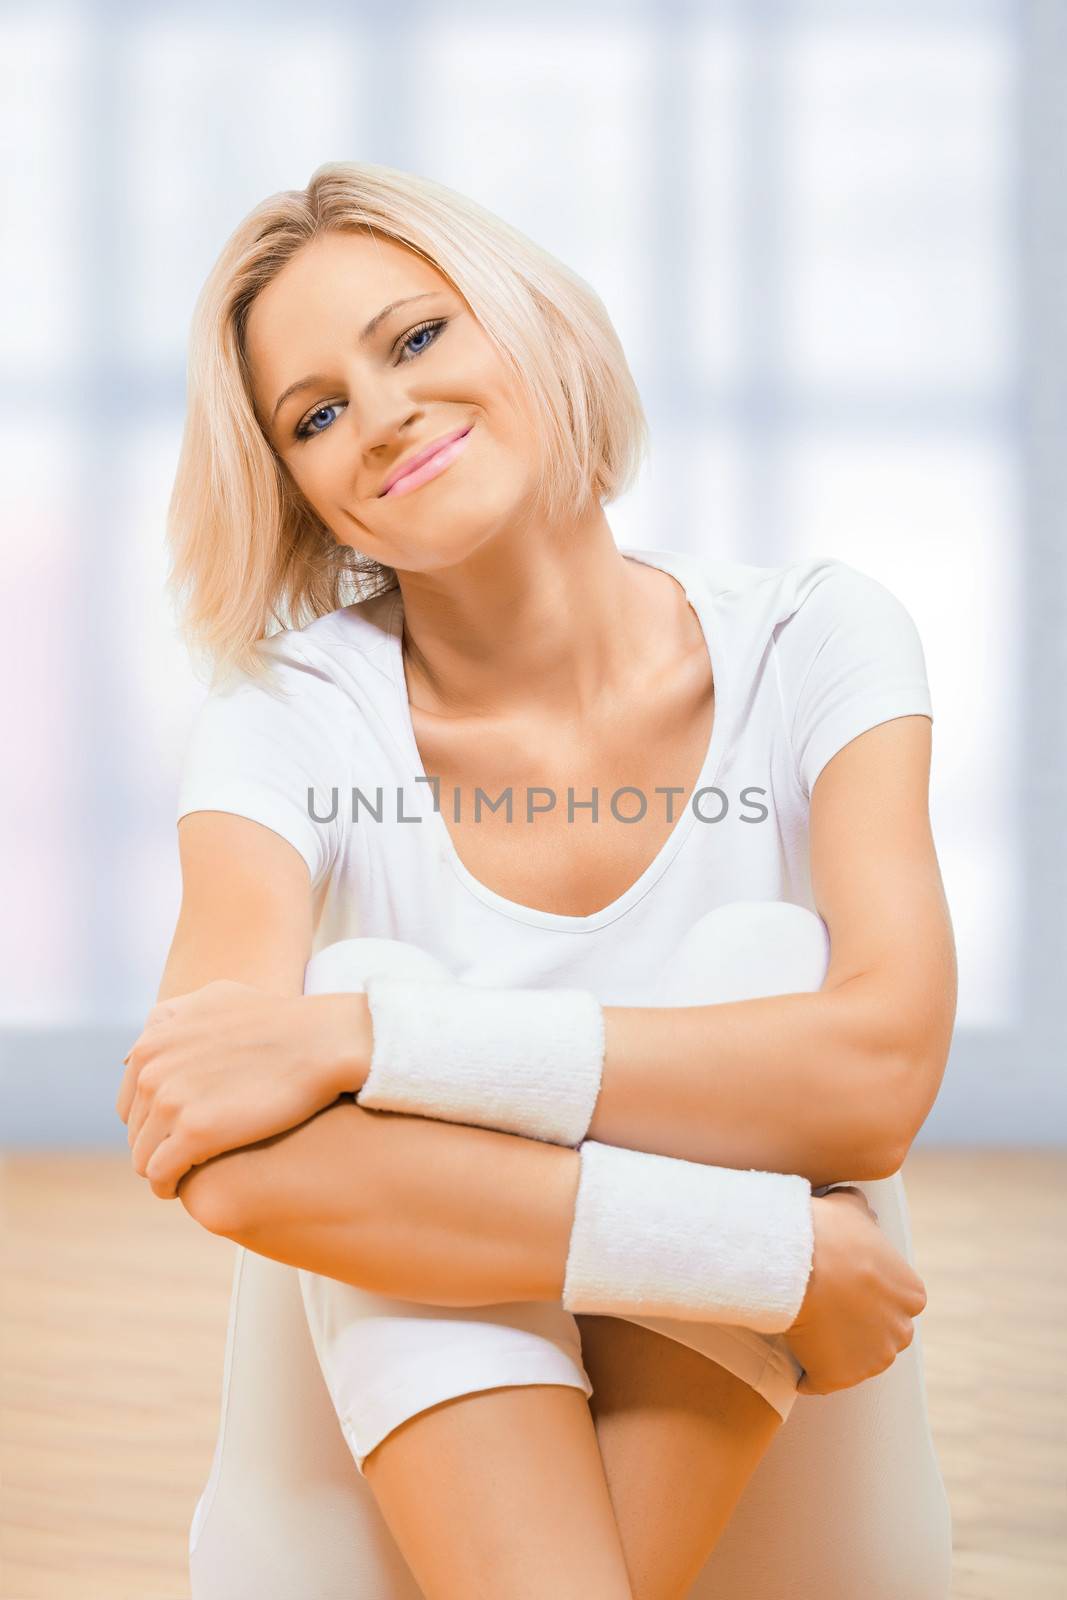 a sports girl sitting on wooden floor by mihalec